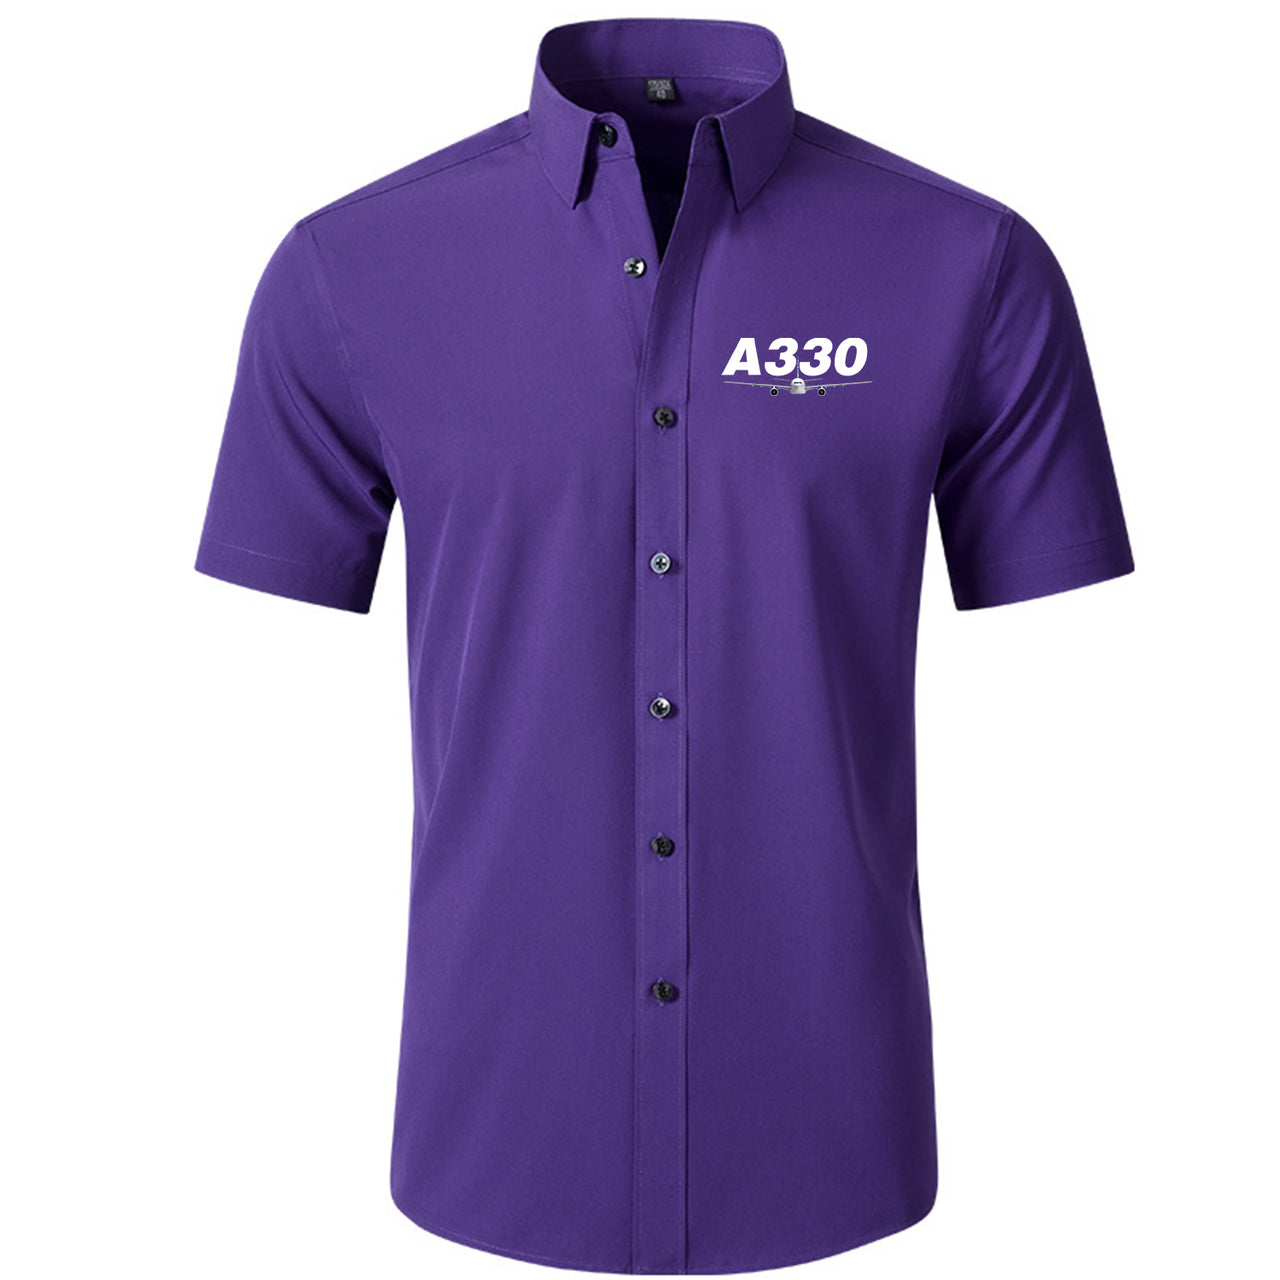 Super Airbus A330 Designed Short Sleeve Shirts